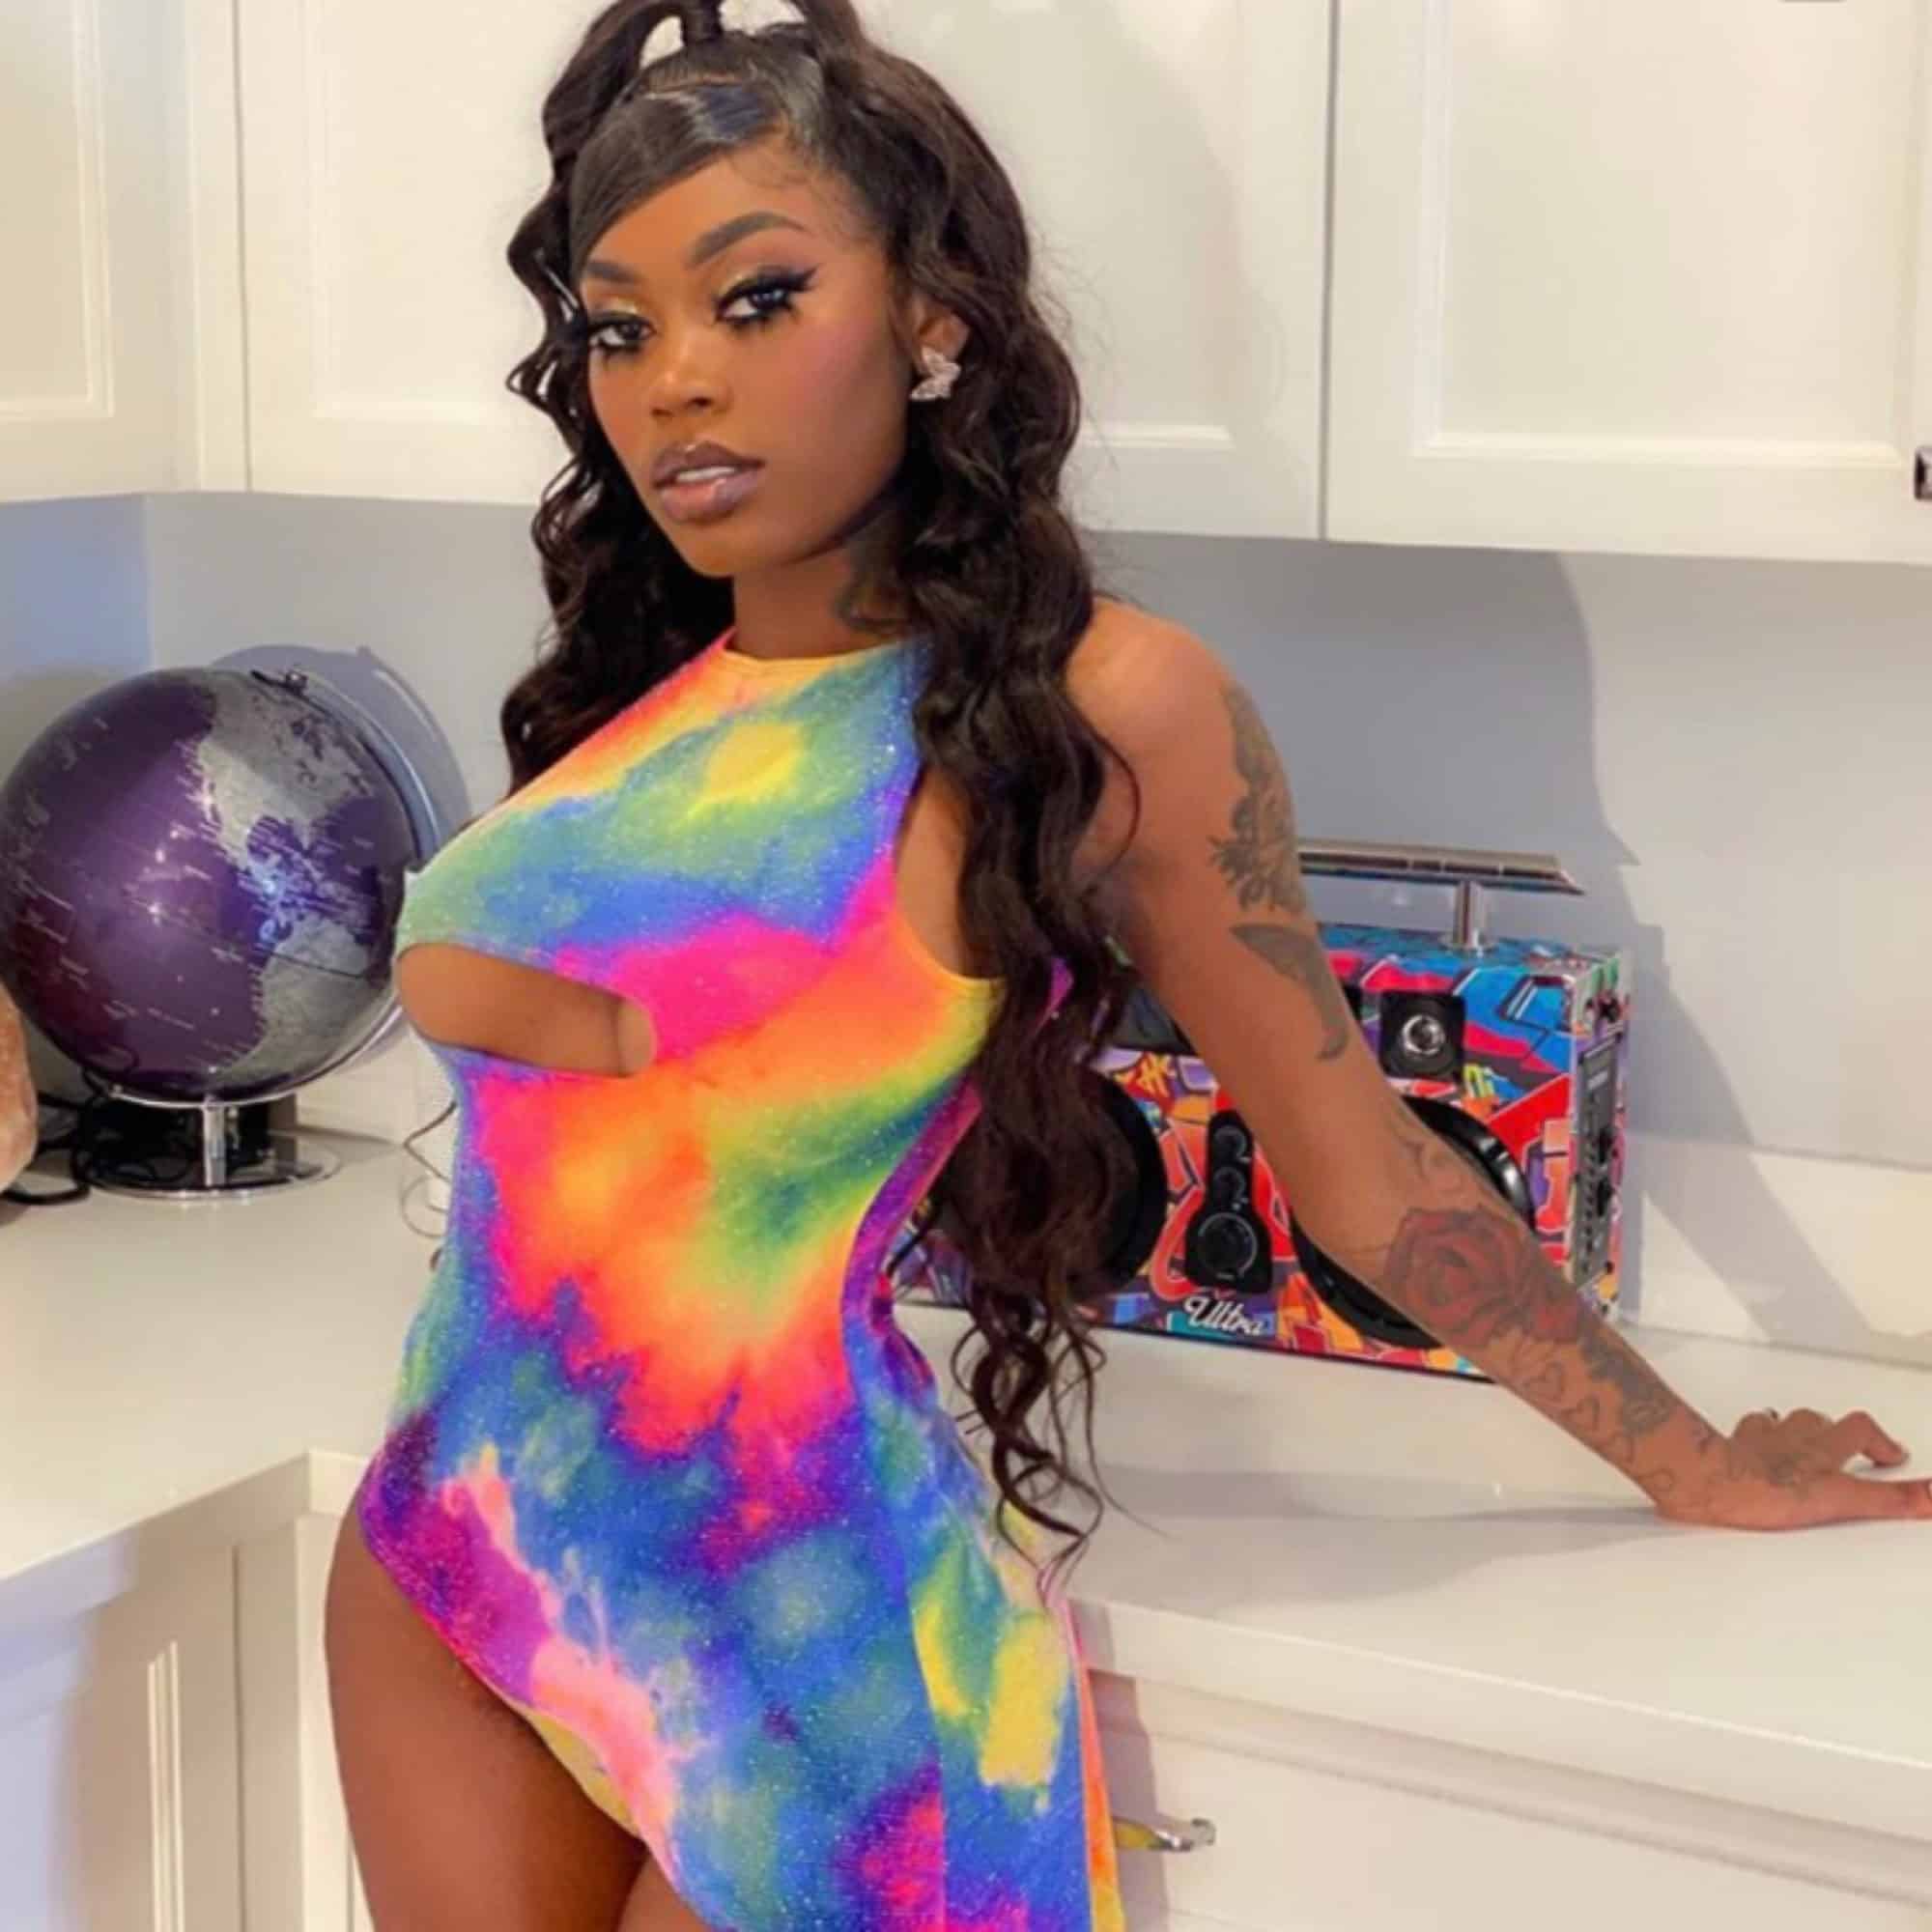 Asian Doll reassures fans who questioned her absence from the 2021 BET Awards that she chose not to go and that she'll be there next year.